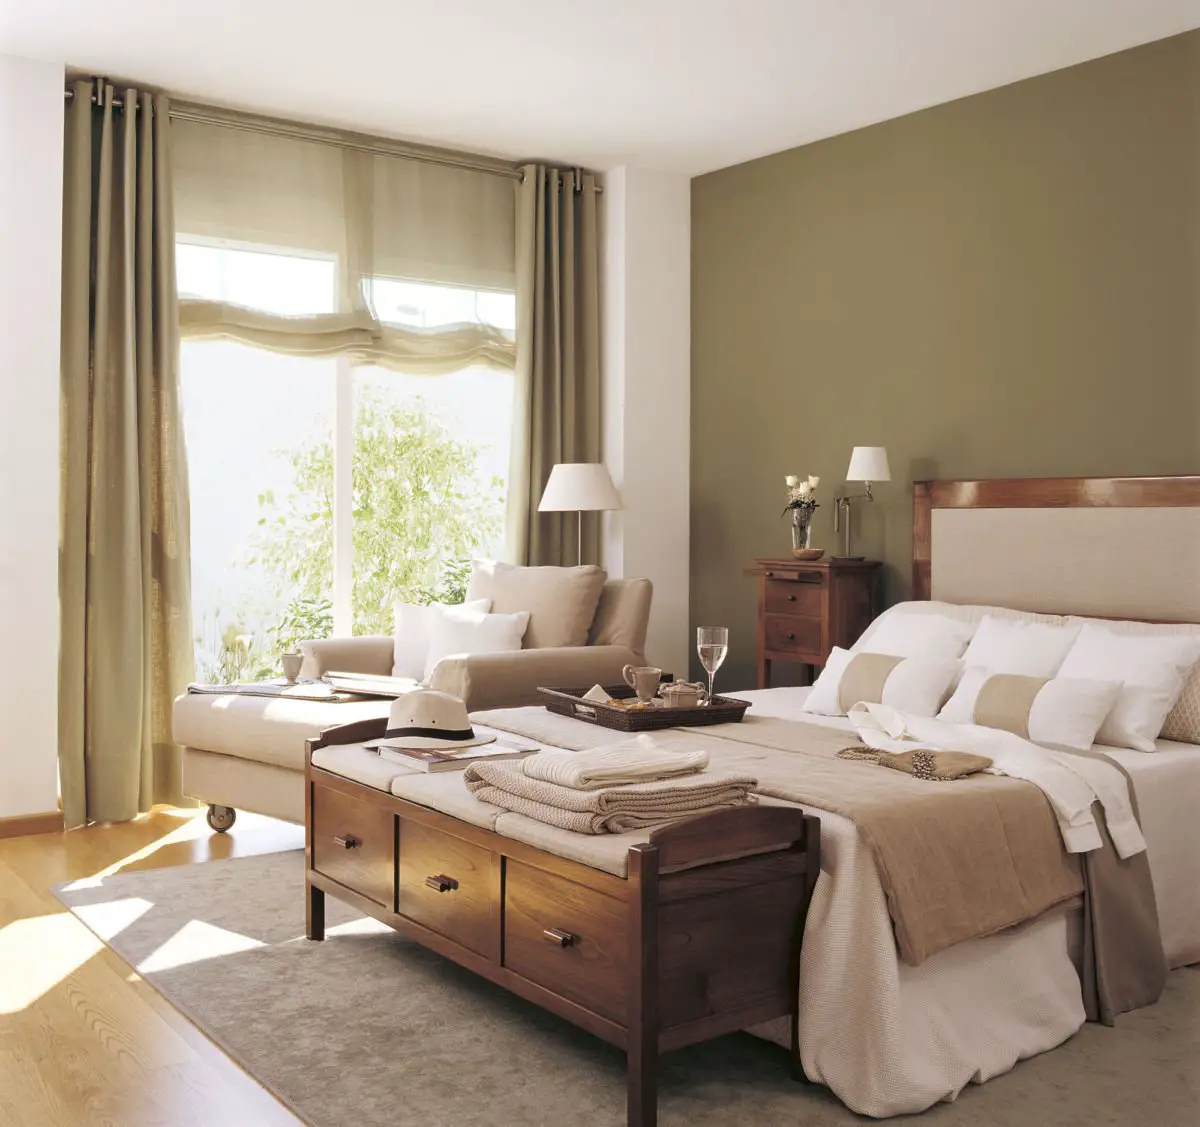 A bedroom with green walls and white furniture gets a fresh coat of painting.